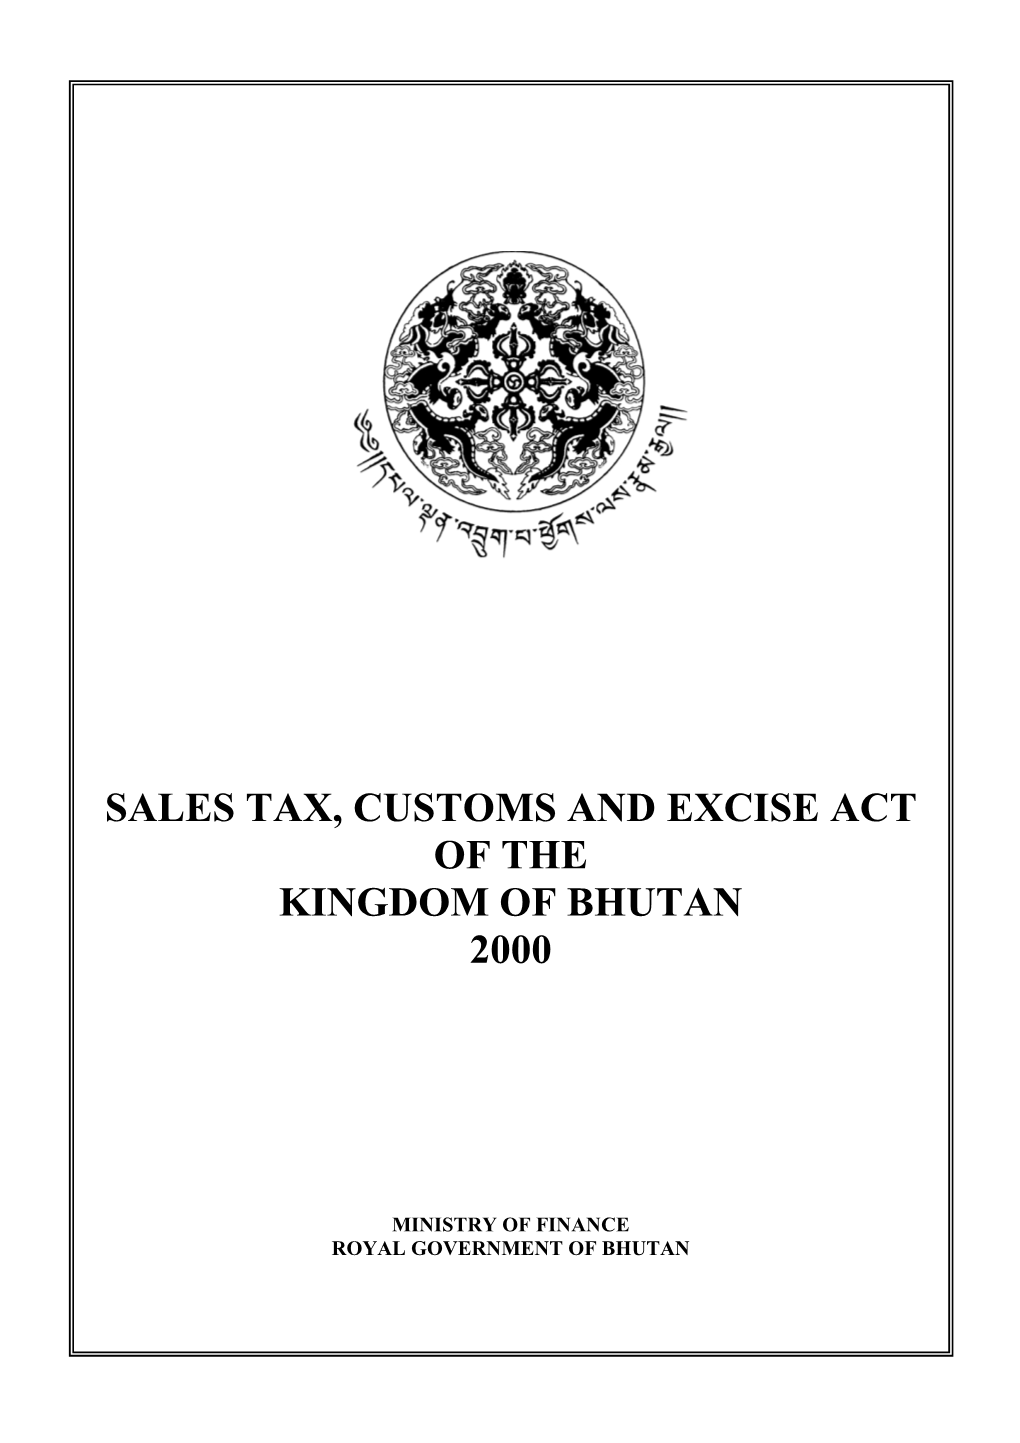 Sales Tax, Customs & Excise Act of the Kingdom of Bhutan 2000